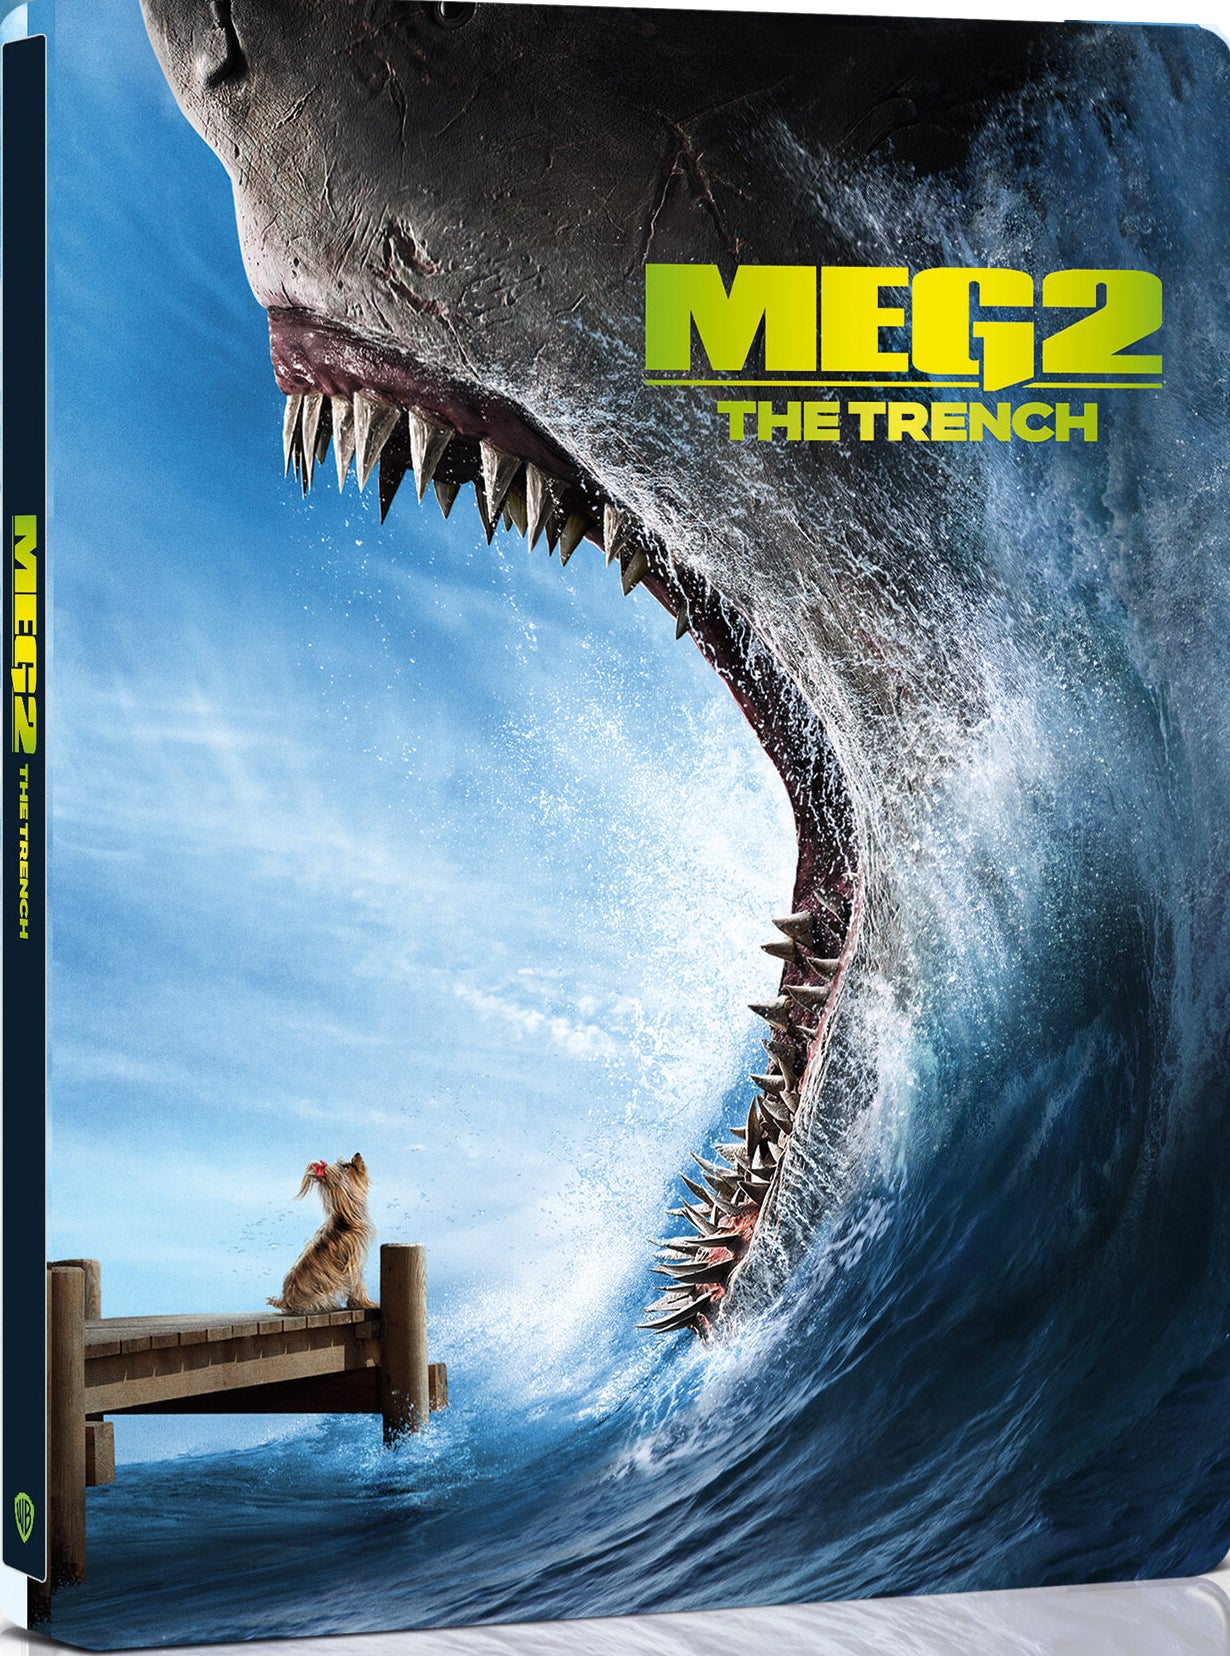 Meg 2: The Trench SteelBook (Exclusive) – Blurays For Everyone